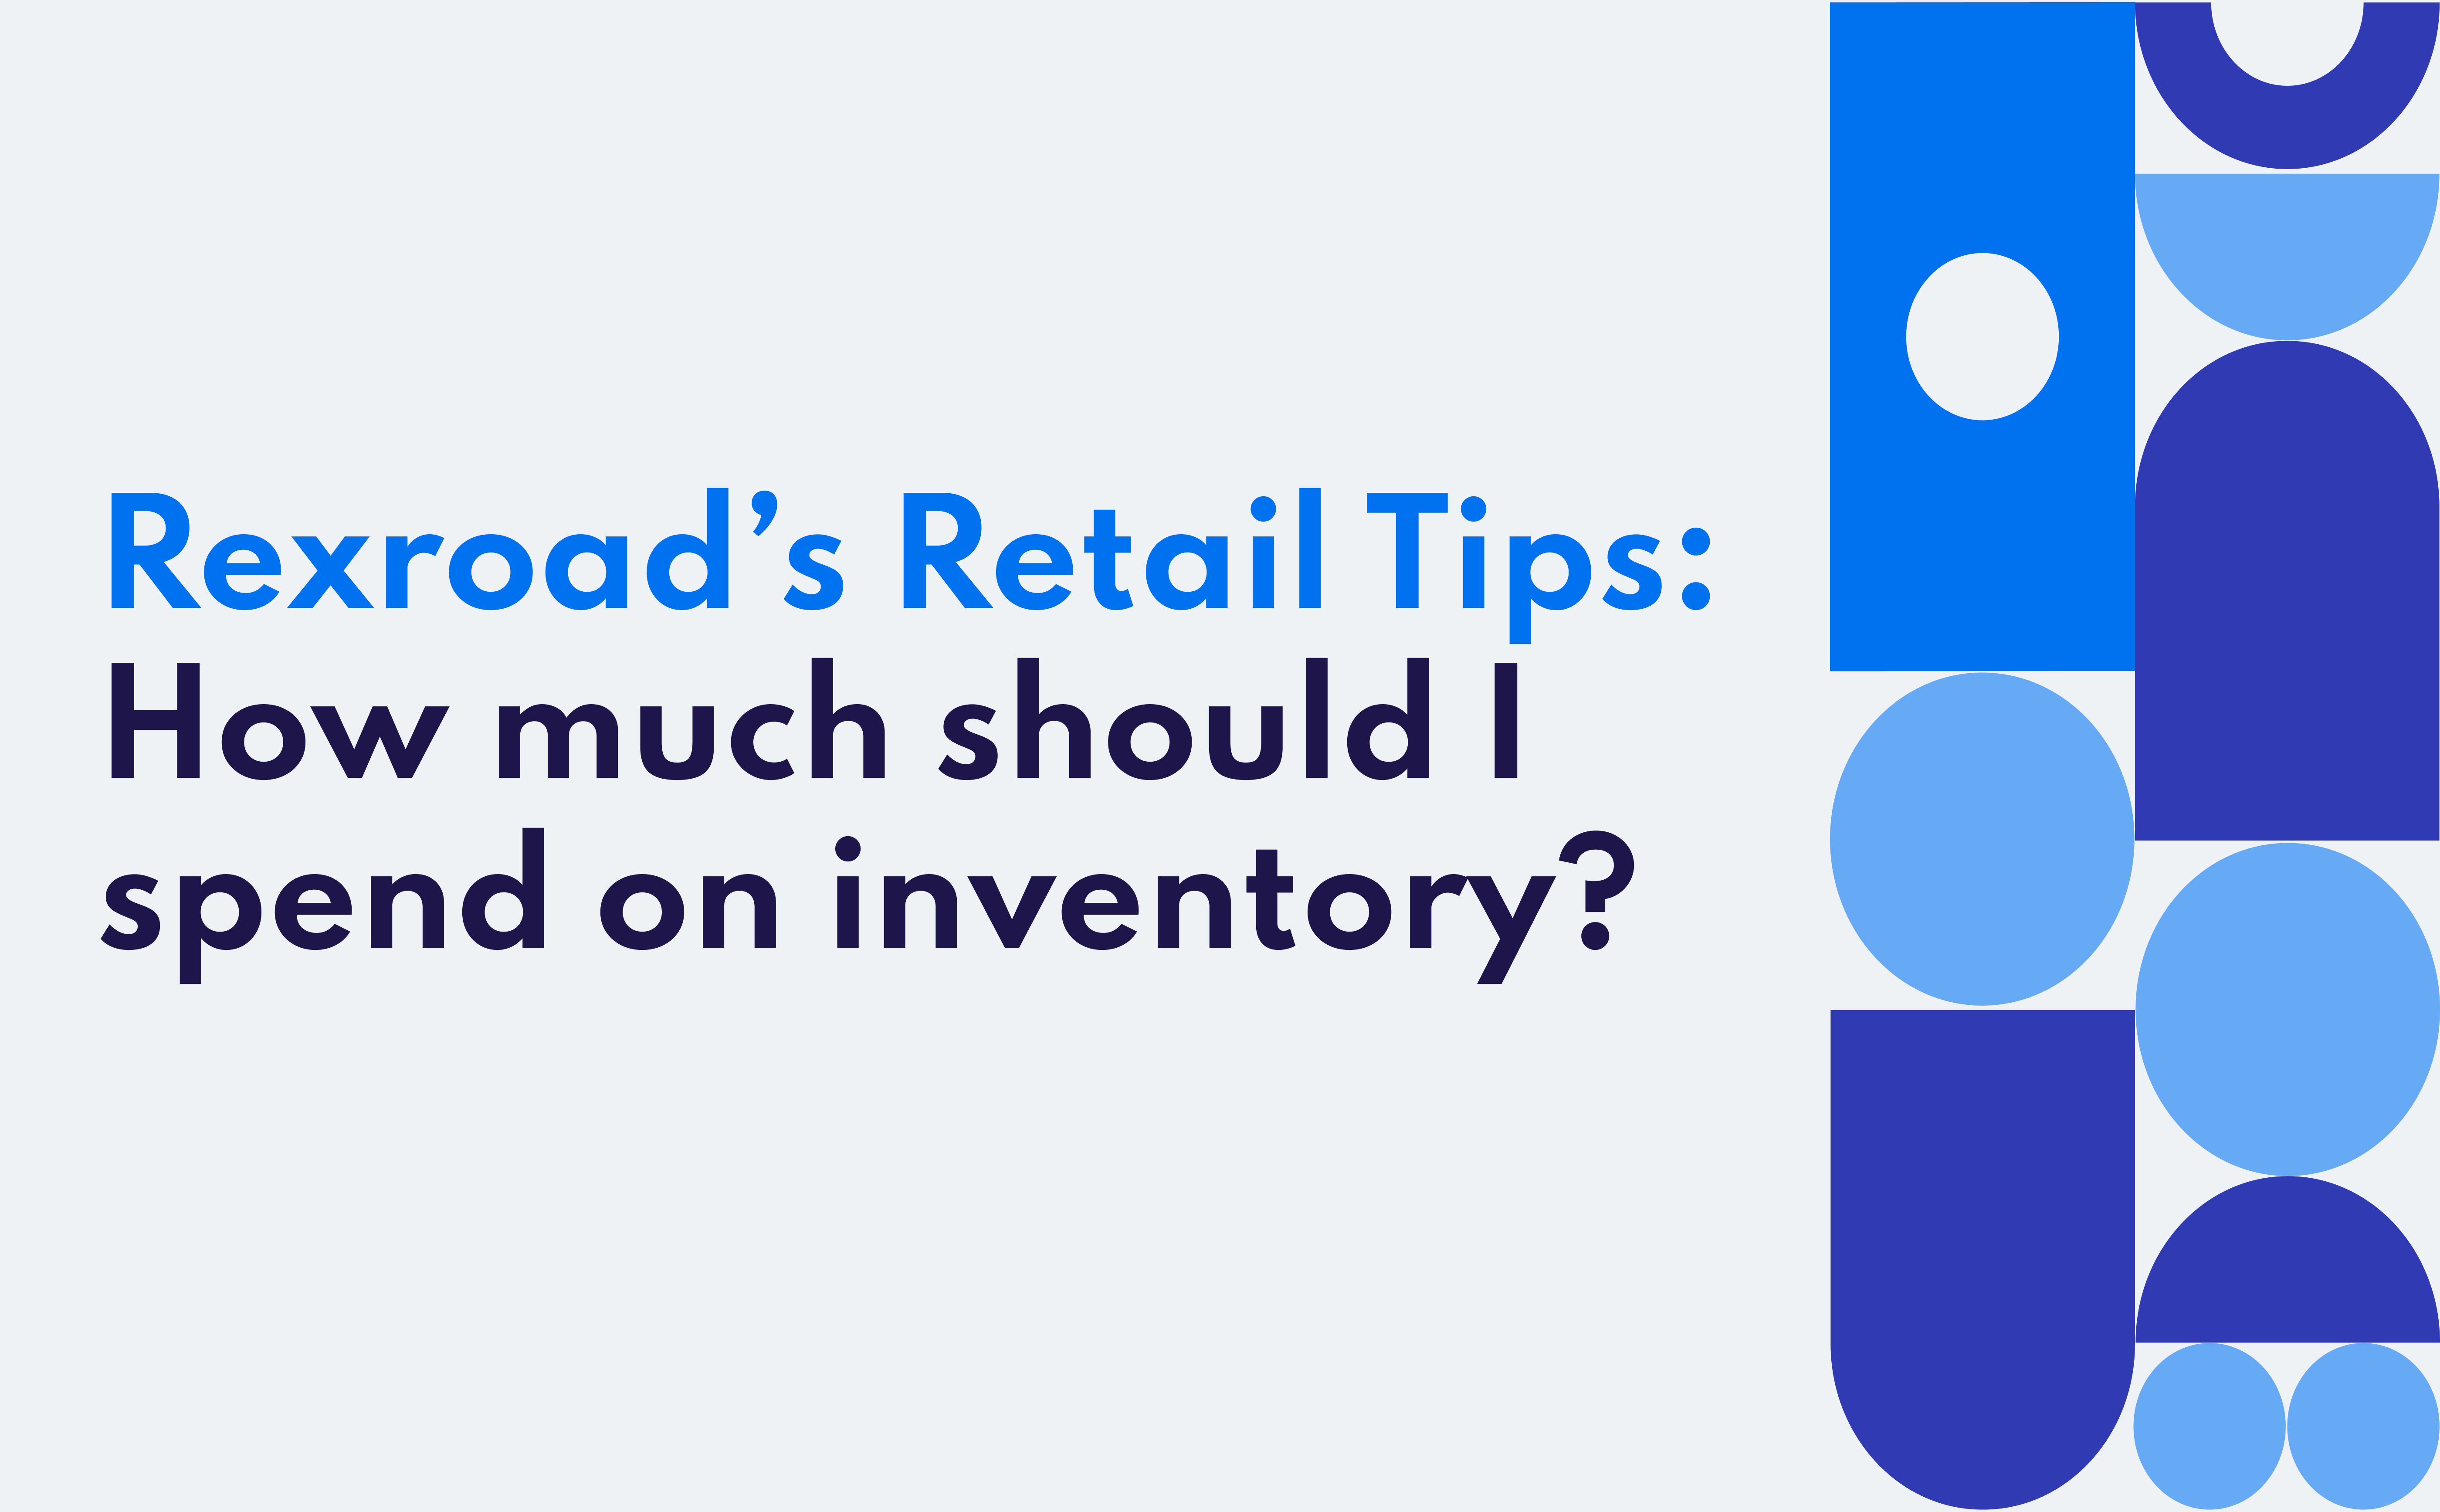 Rexroad’s Retail Tips: How much should I spend on inventory?